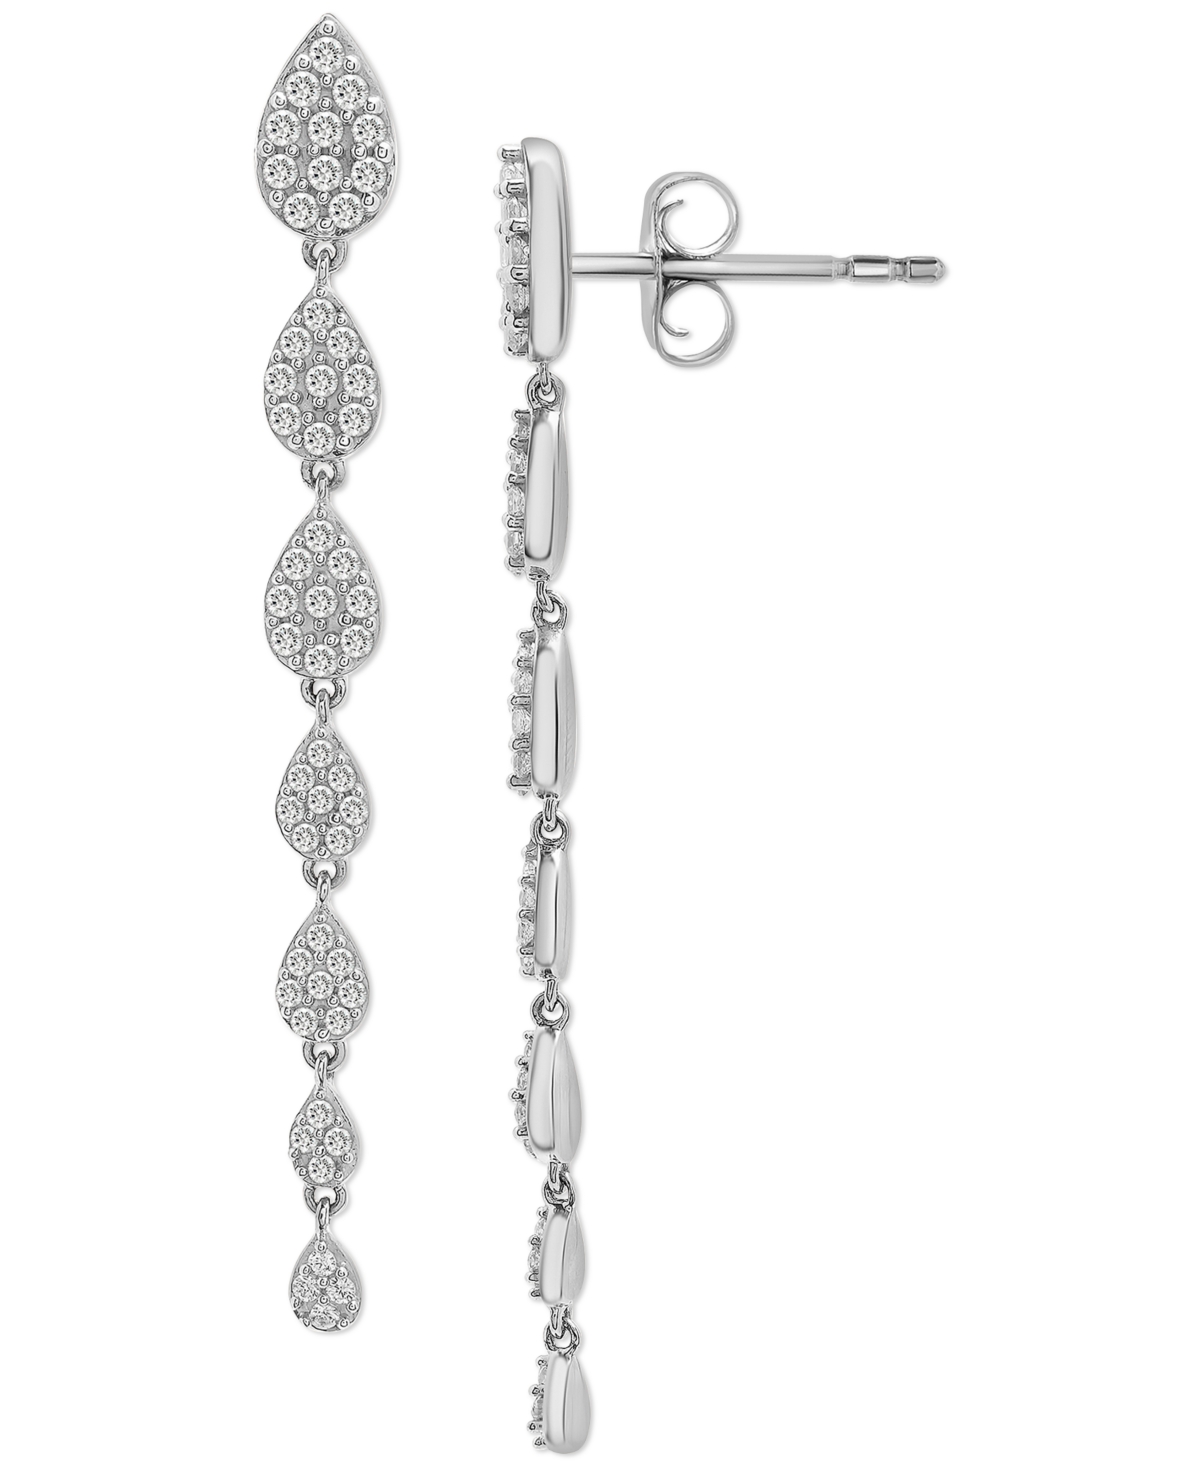 Diamond Cluster Linear Drop Earrings (1 ct. t.w.) in 14k Gold or 14k White Gold, Created for Macy's - White Gold